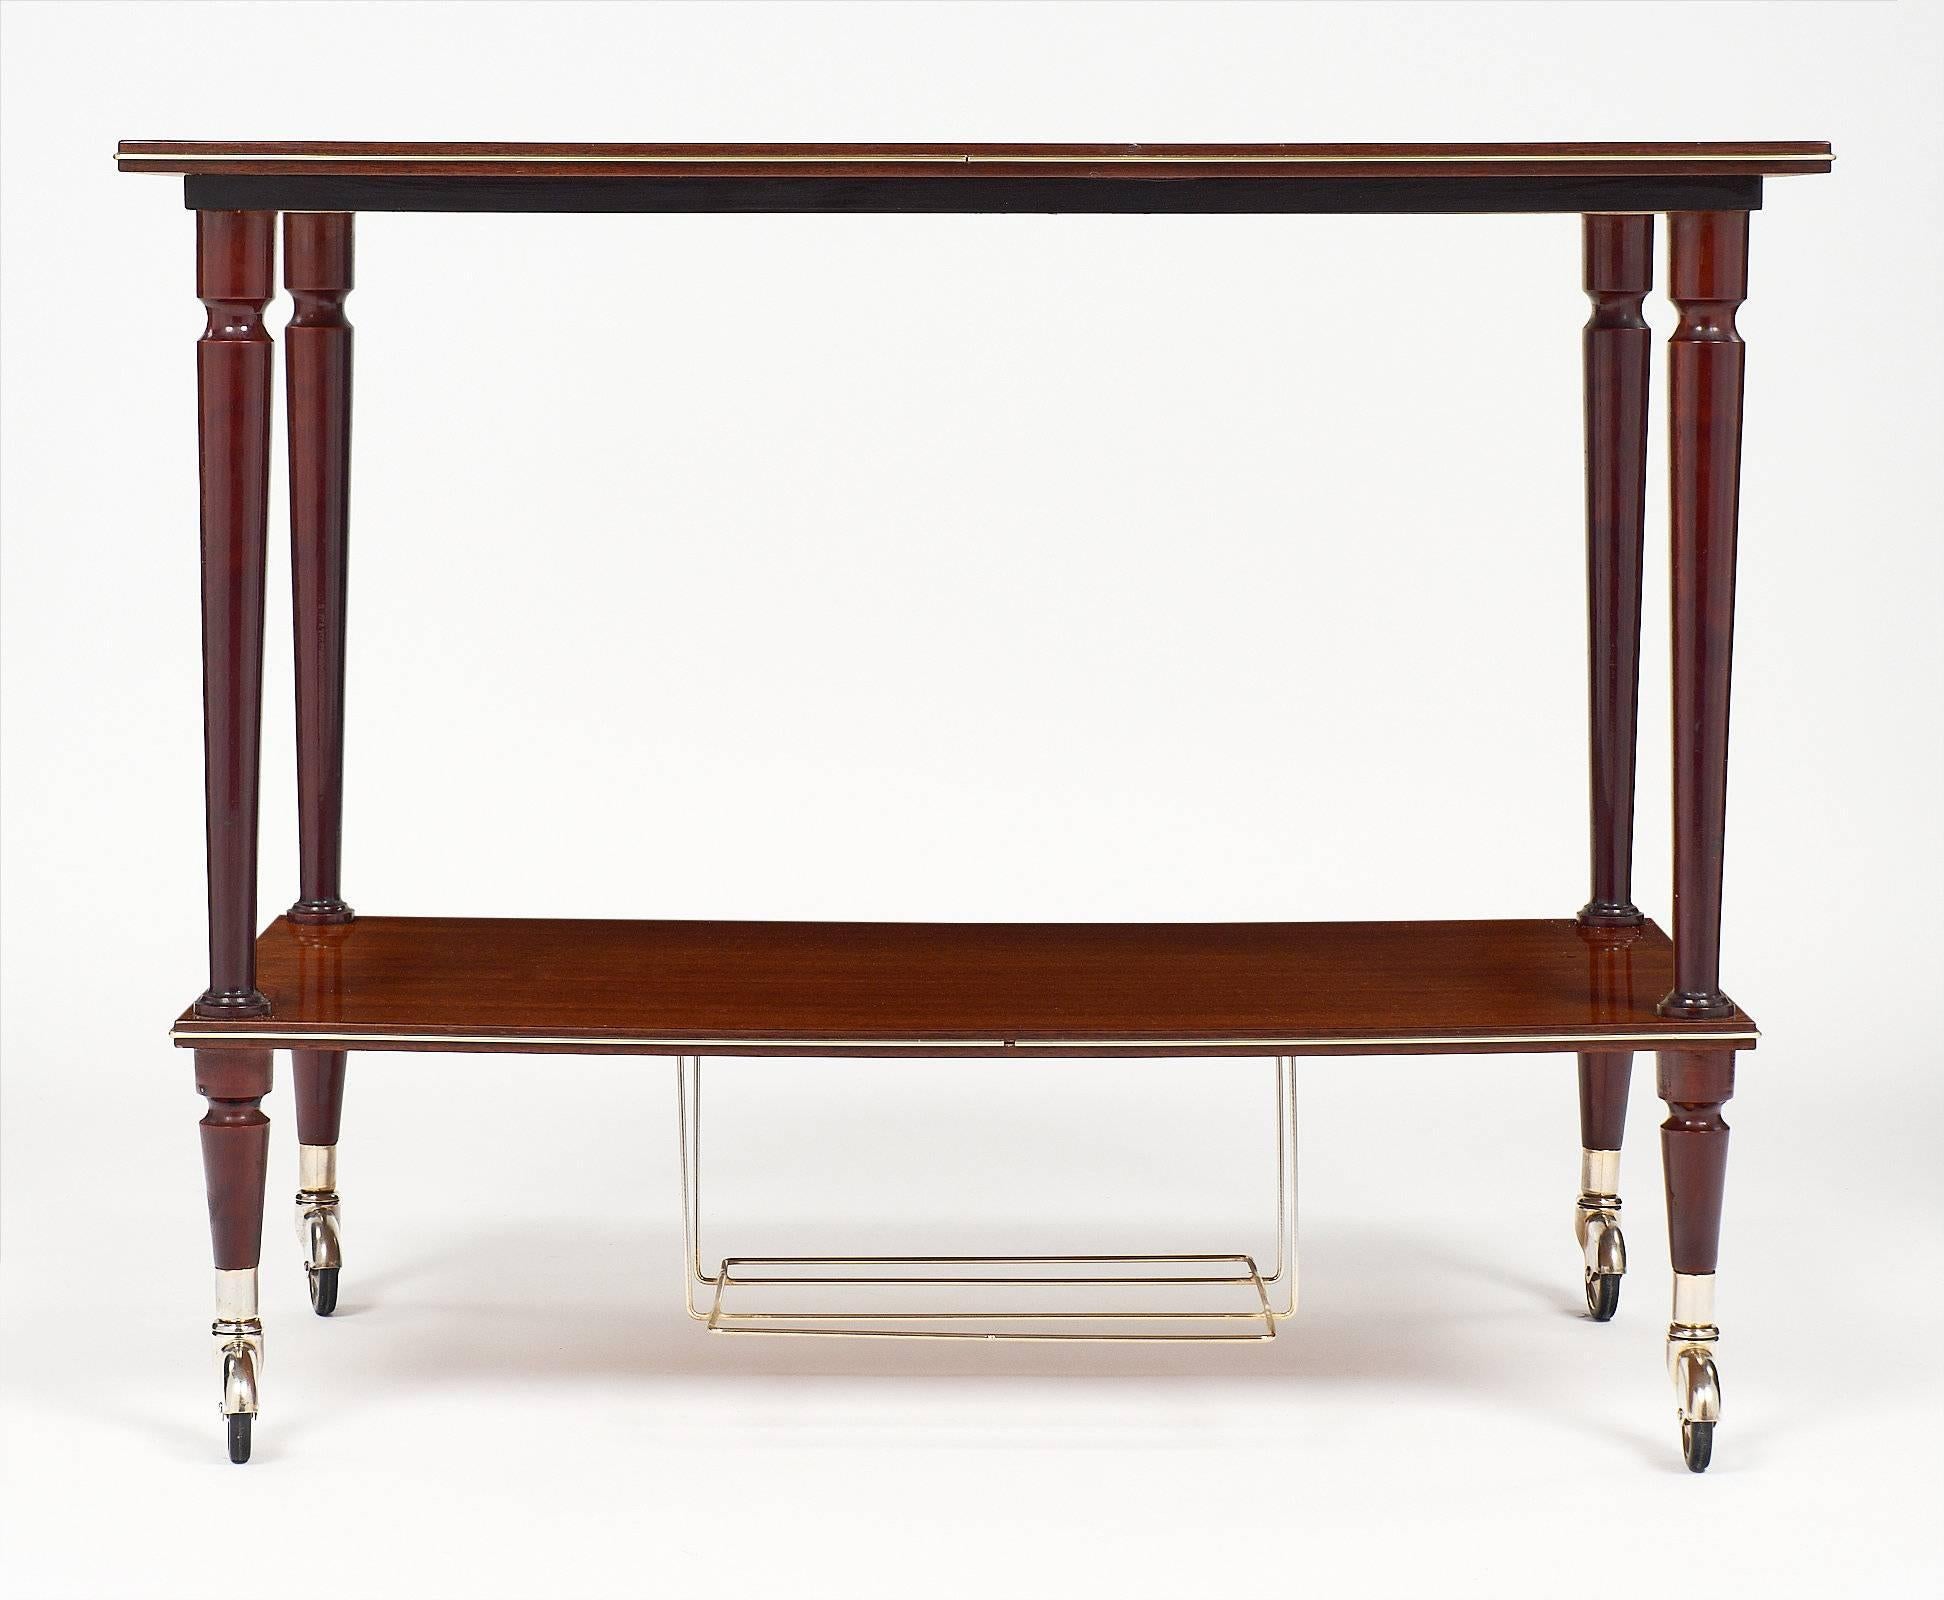 A French modernist period vintage tea cart made of mahogany and brass. This piece could also be used as a side table or bar cart. The tapered legs sit on casters. We love the high gloss finish and the efficiency of this table, right out of “Mad Men.”